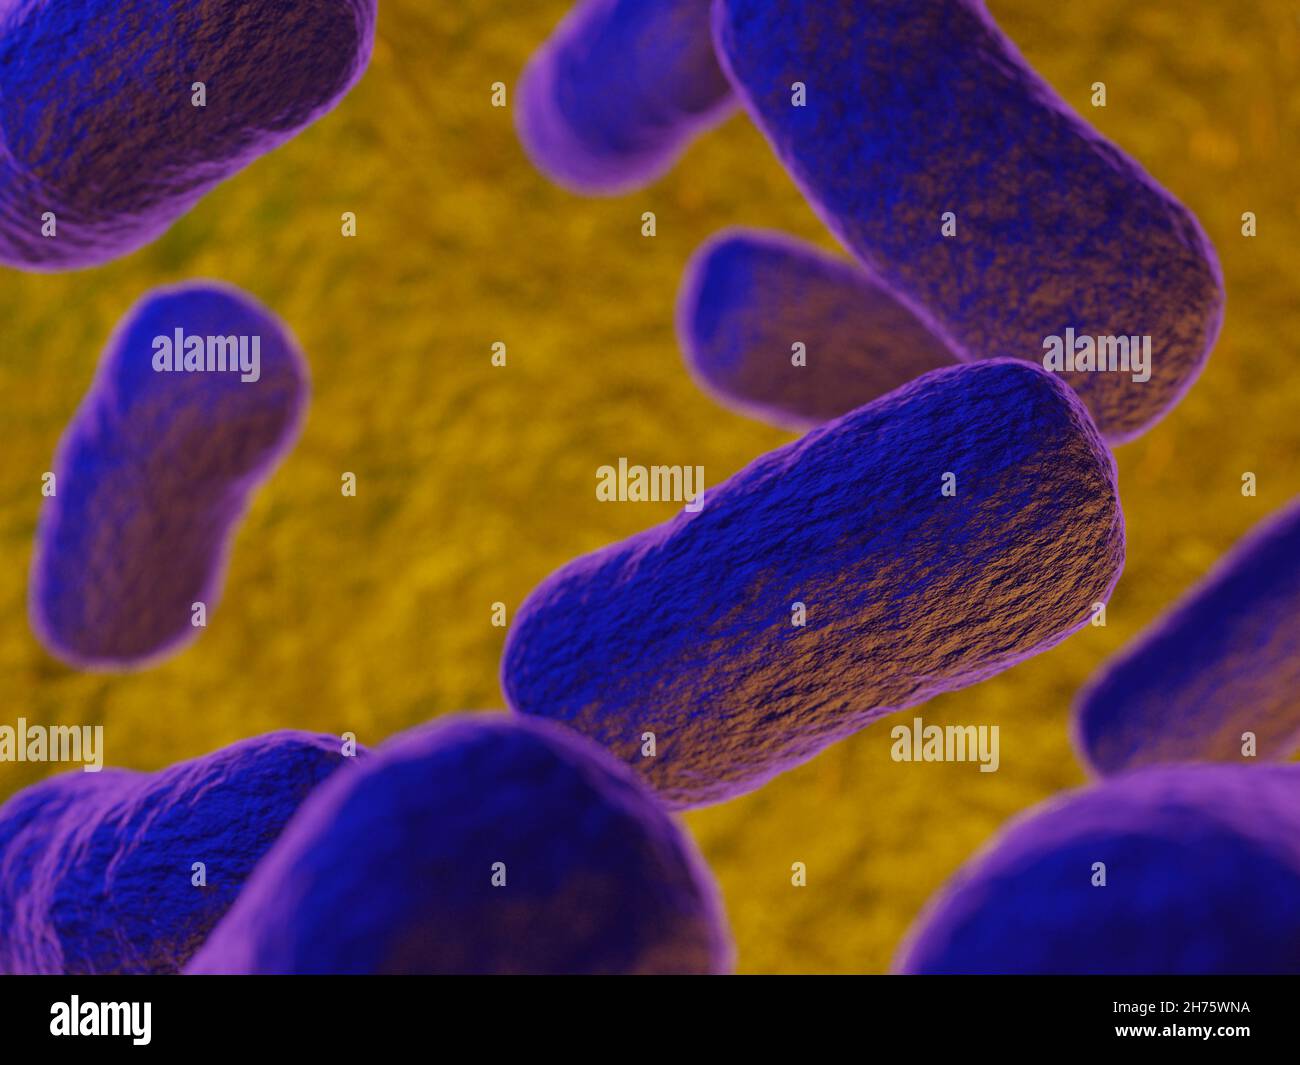 An illustration of purple bacteria against a yellow background Stock Photo